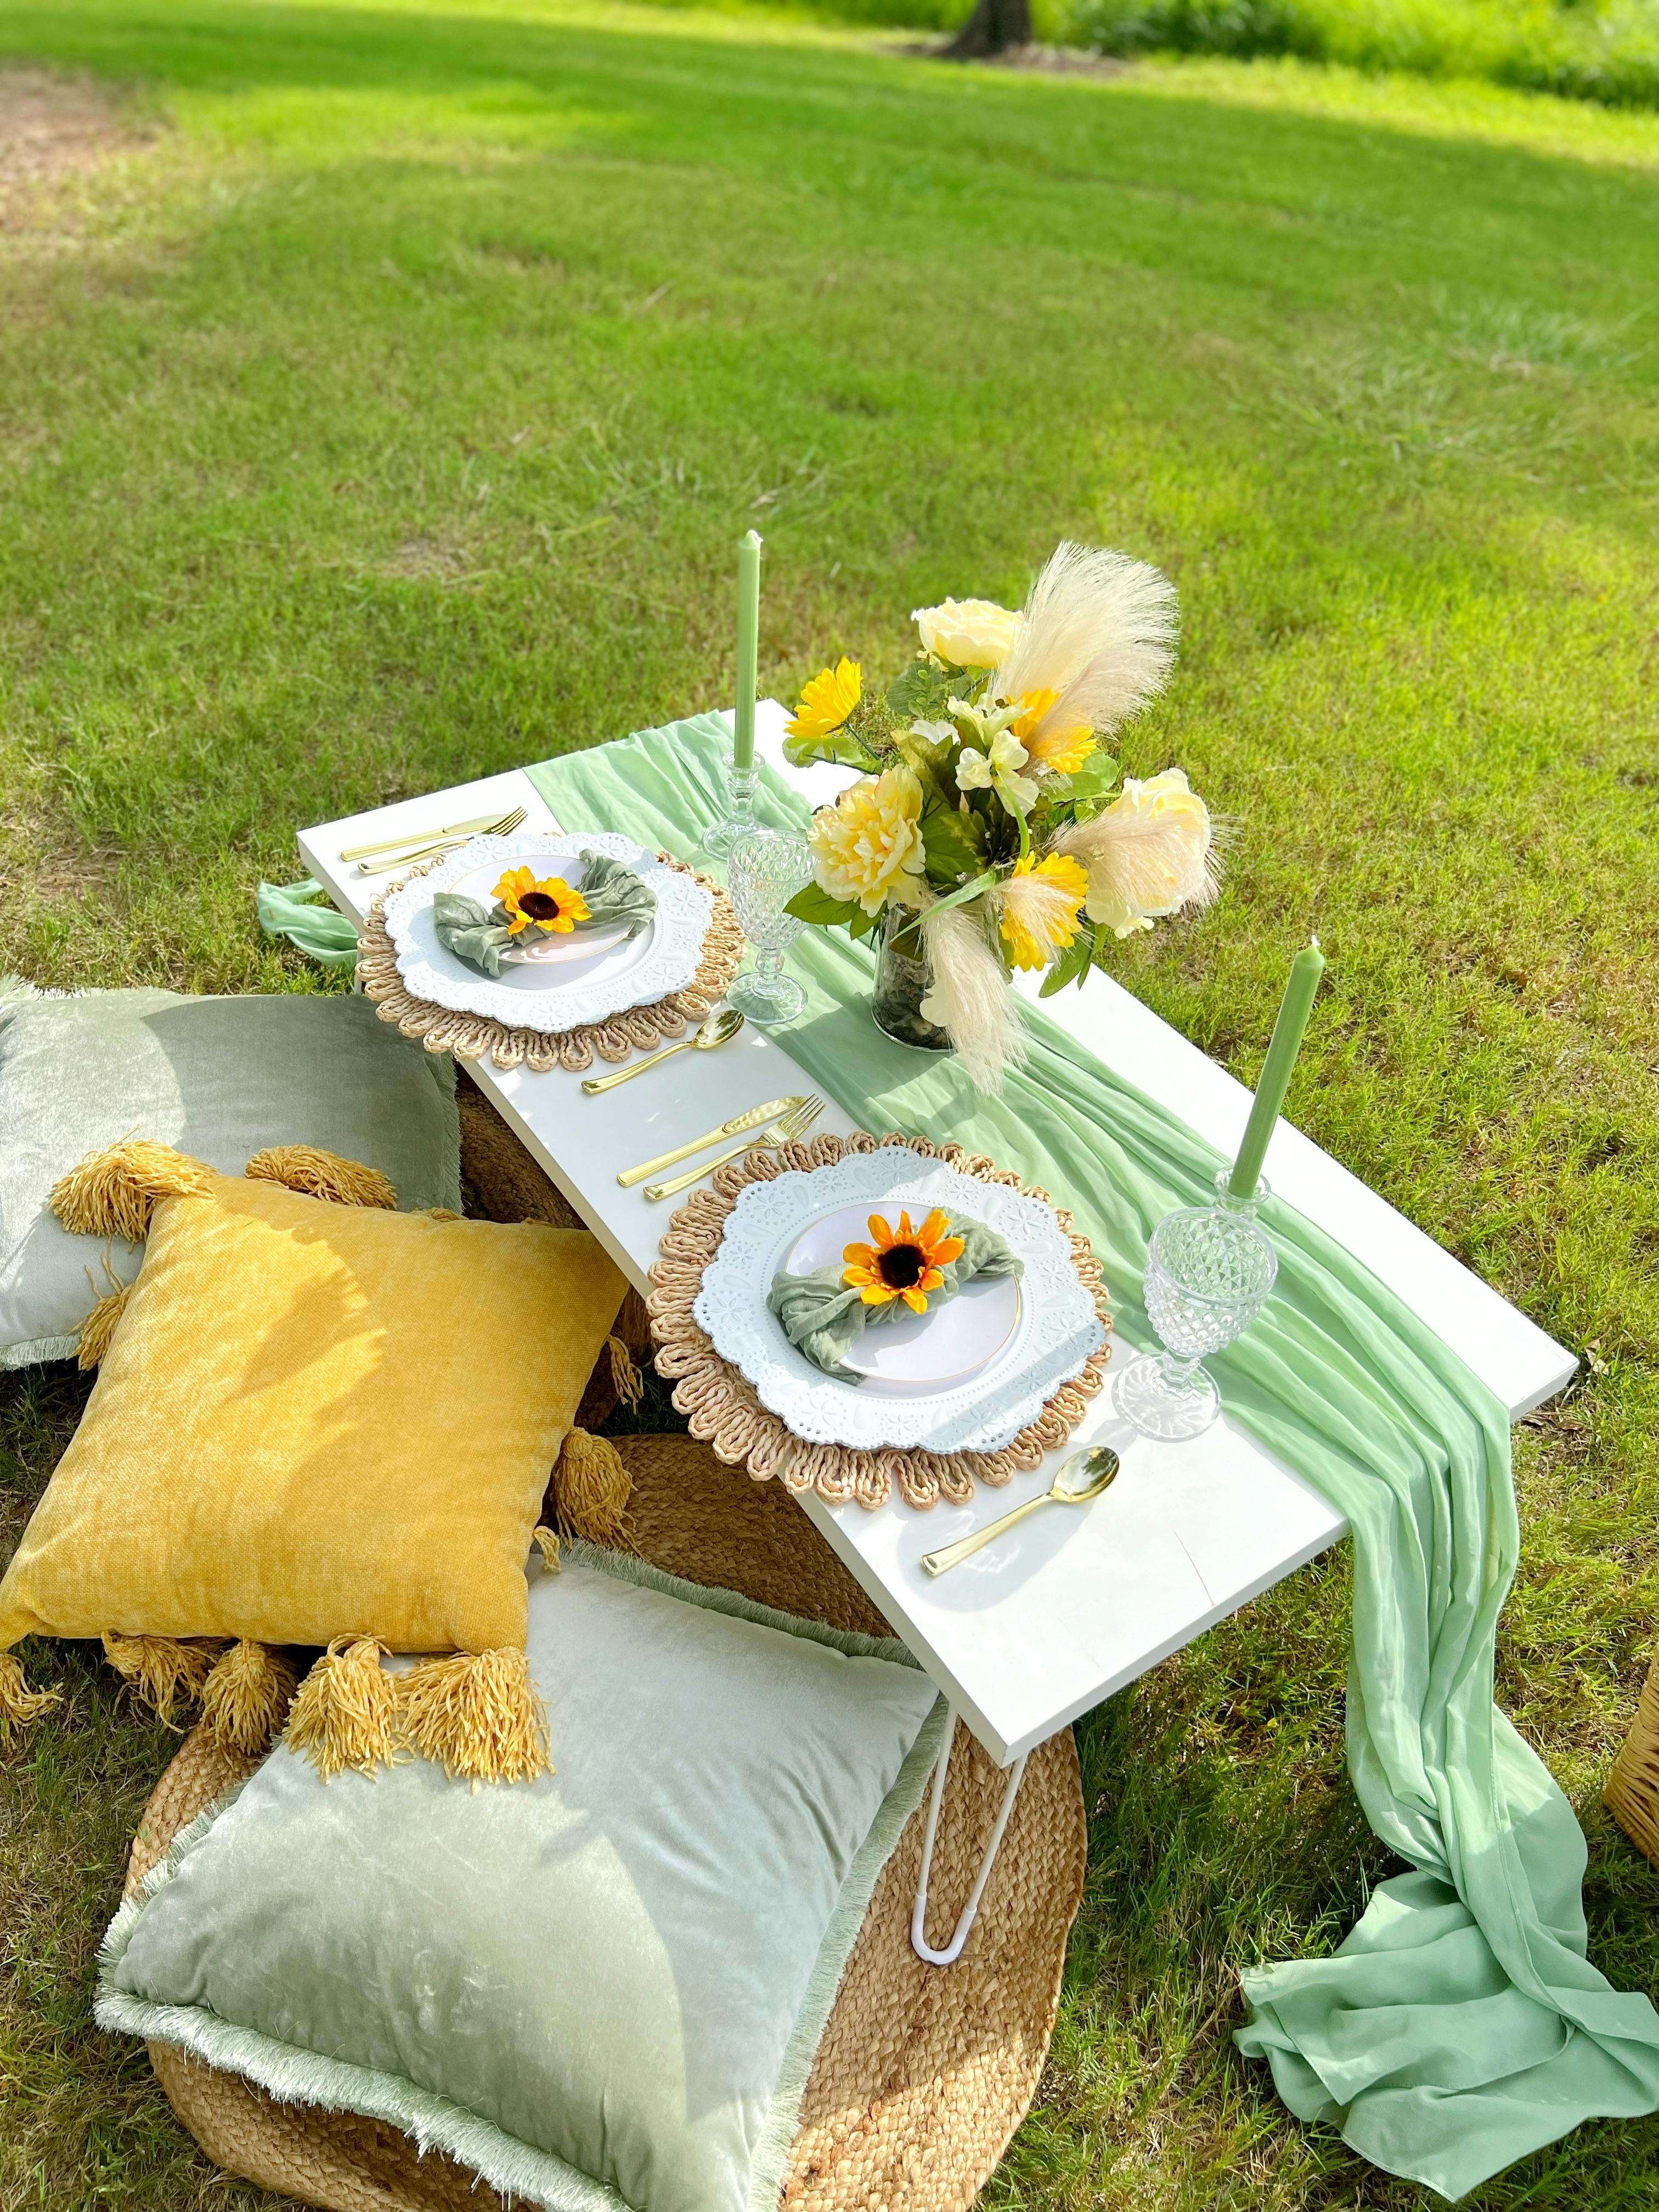 Picnic for 2 guests